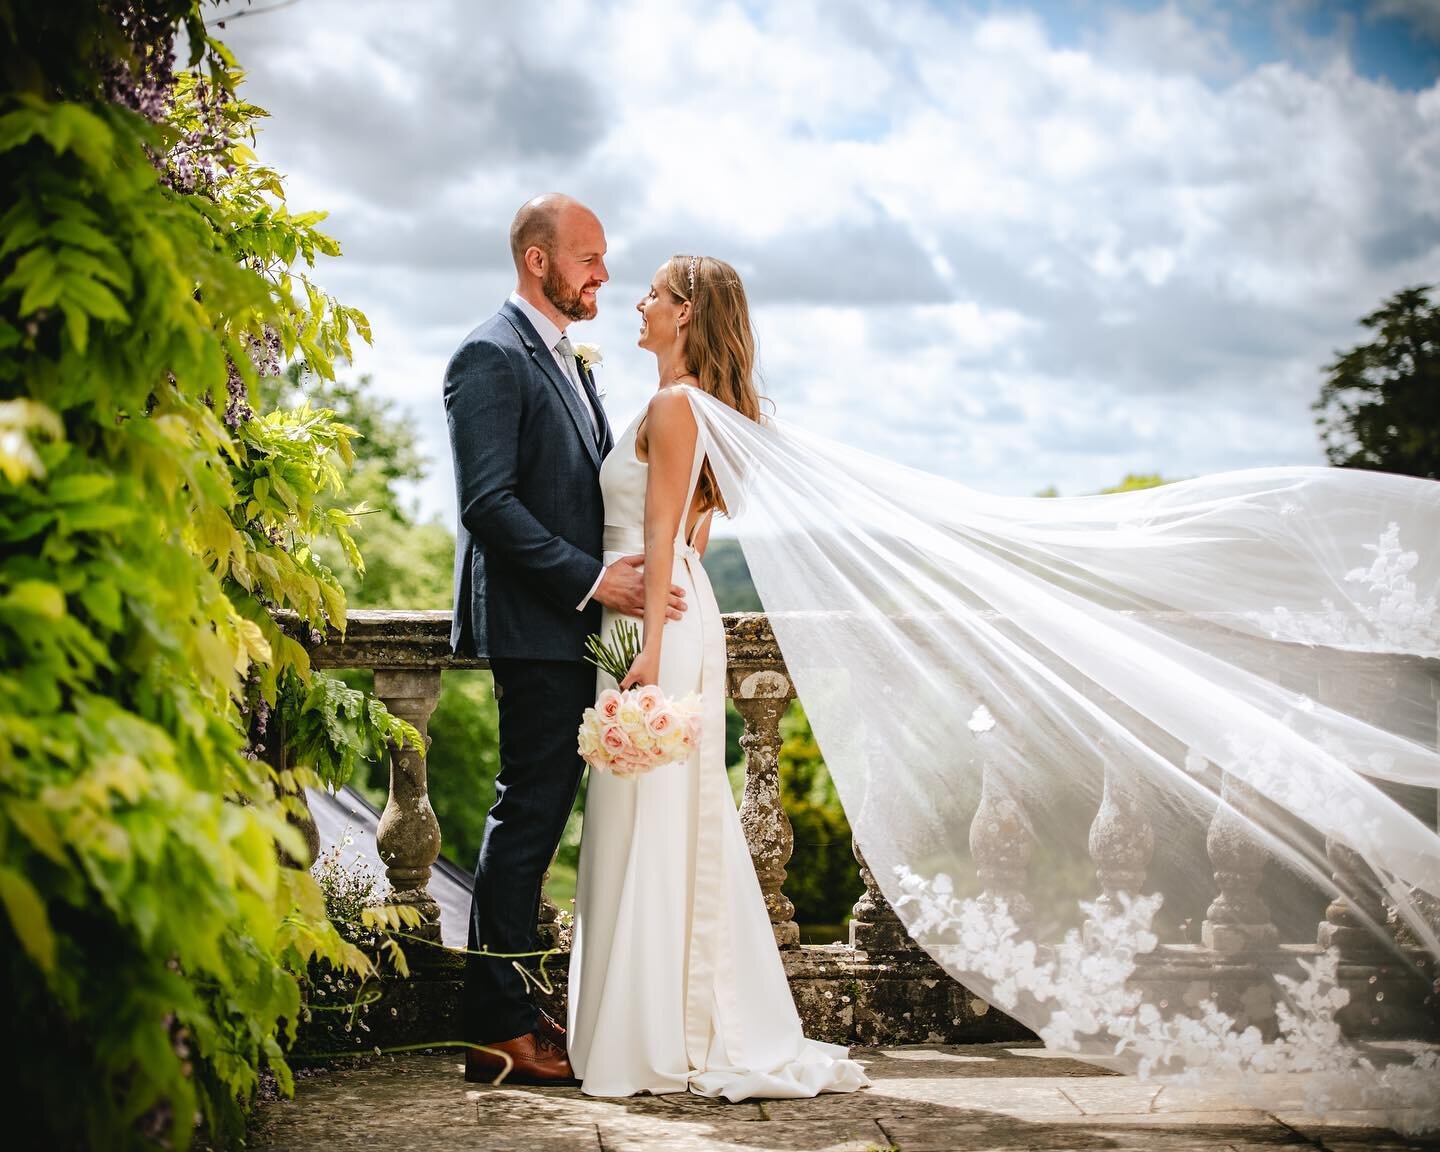 Wedding season will start again soon and I can&rsquo;t wait to photograph this year&rsquo;s couples.
.
These images are from a stunning wedding we photographed last year near Hale in Wiltshire.
.
.
If you want more information on our wedding photogra